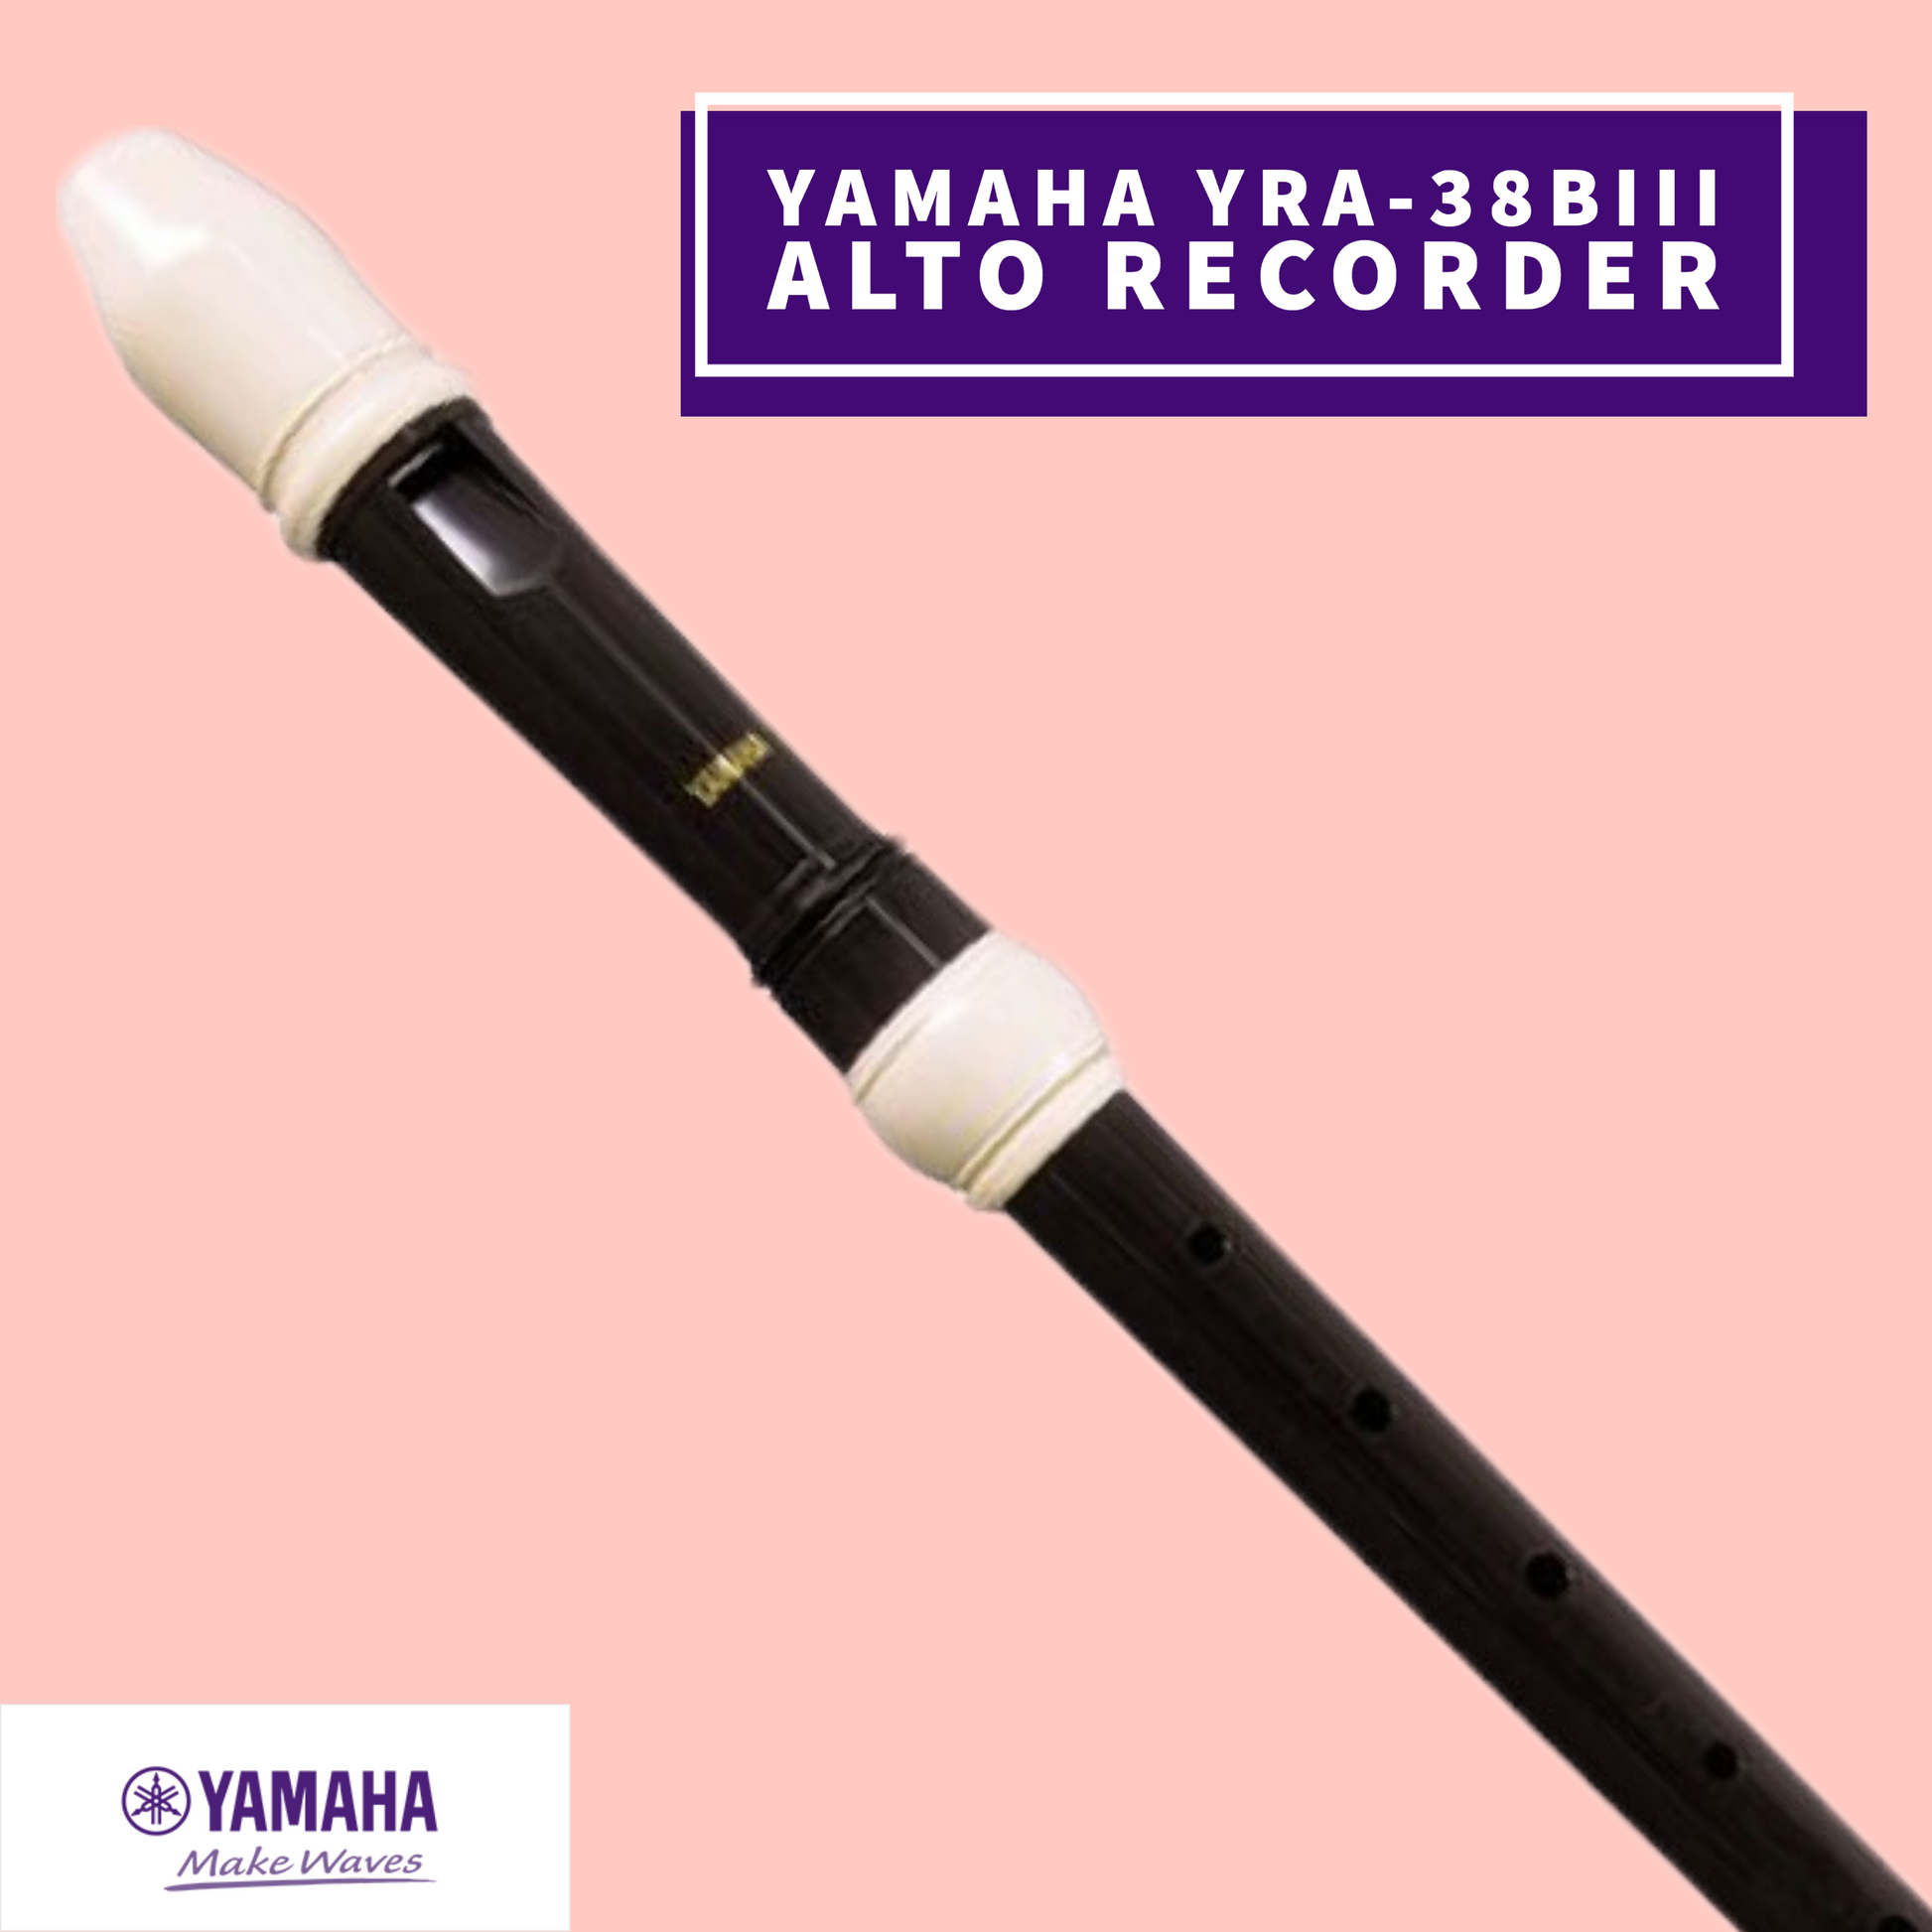 Yamaha Yra-38Biii Alto 3 Piece Abs Resin Recorder (Key Of F) Musical Instruments & Accessories